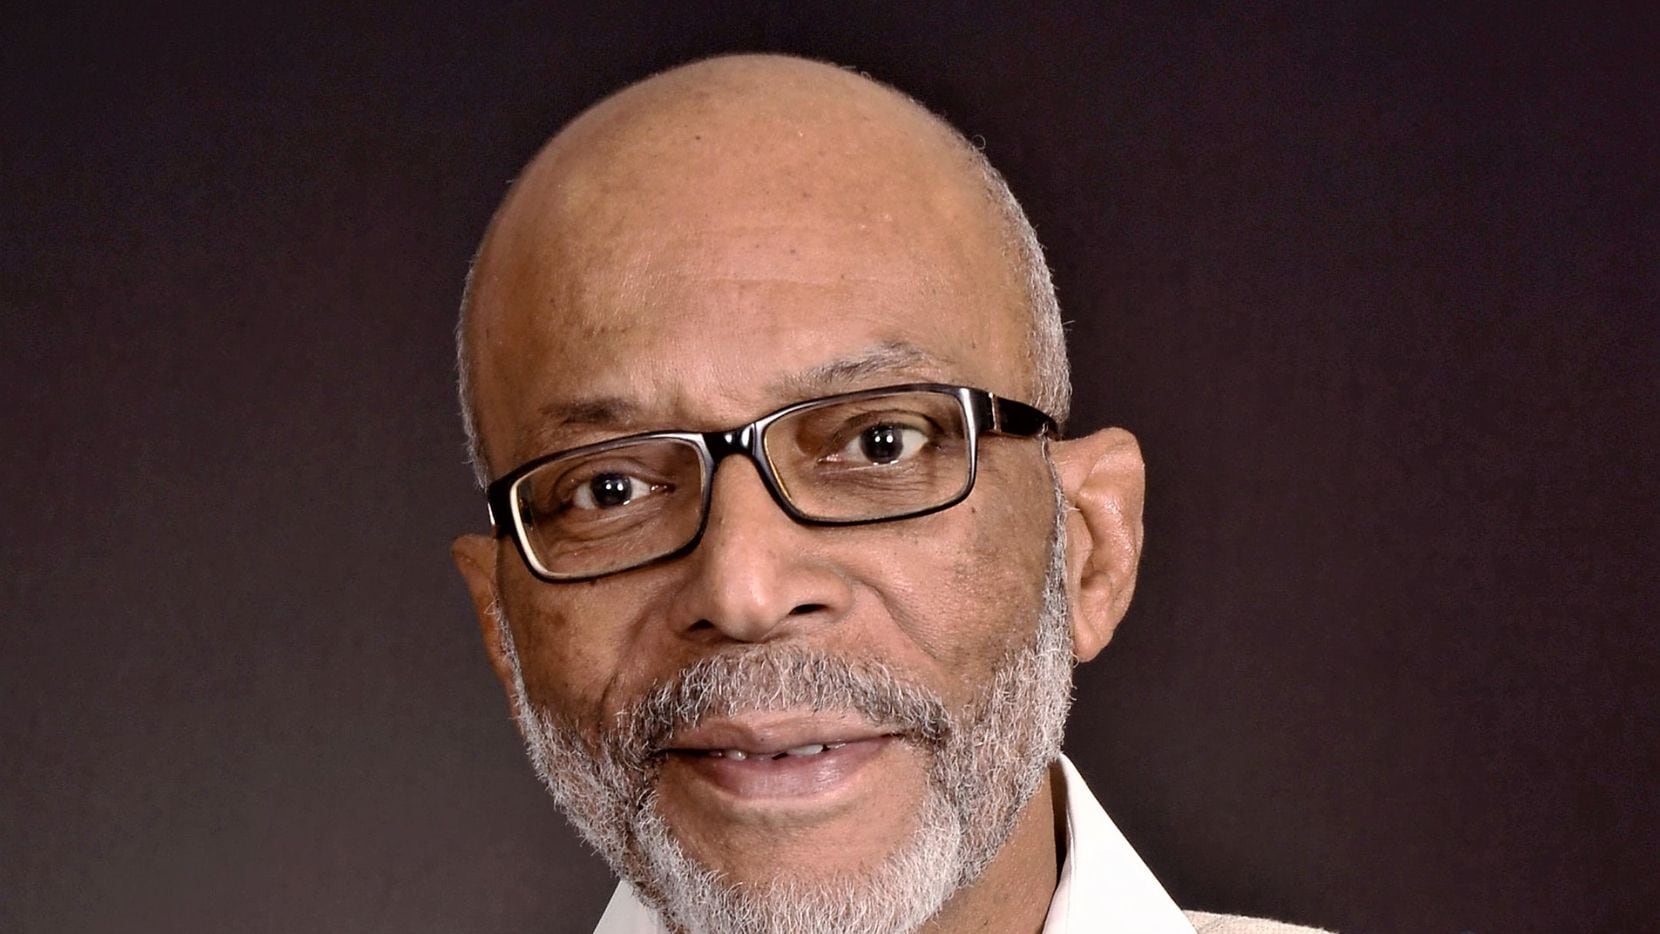 Larry Baraka, Dallas County’s First Black District Judge and Felony Prosecutor, Dies at 71